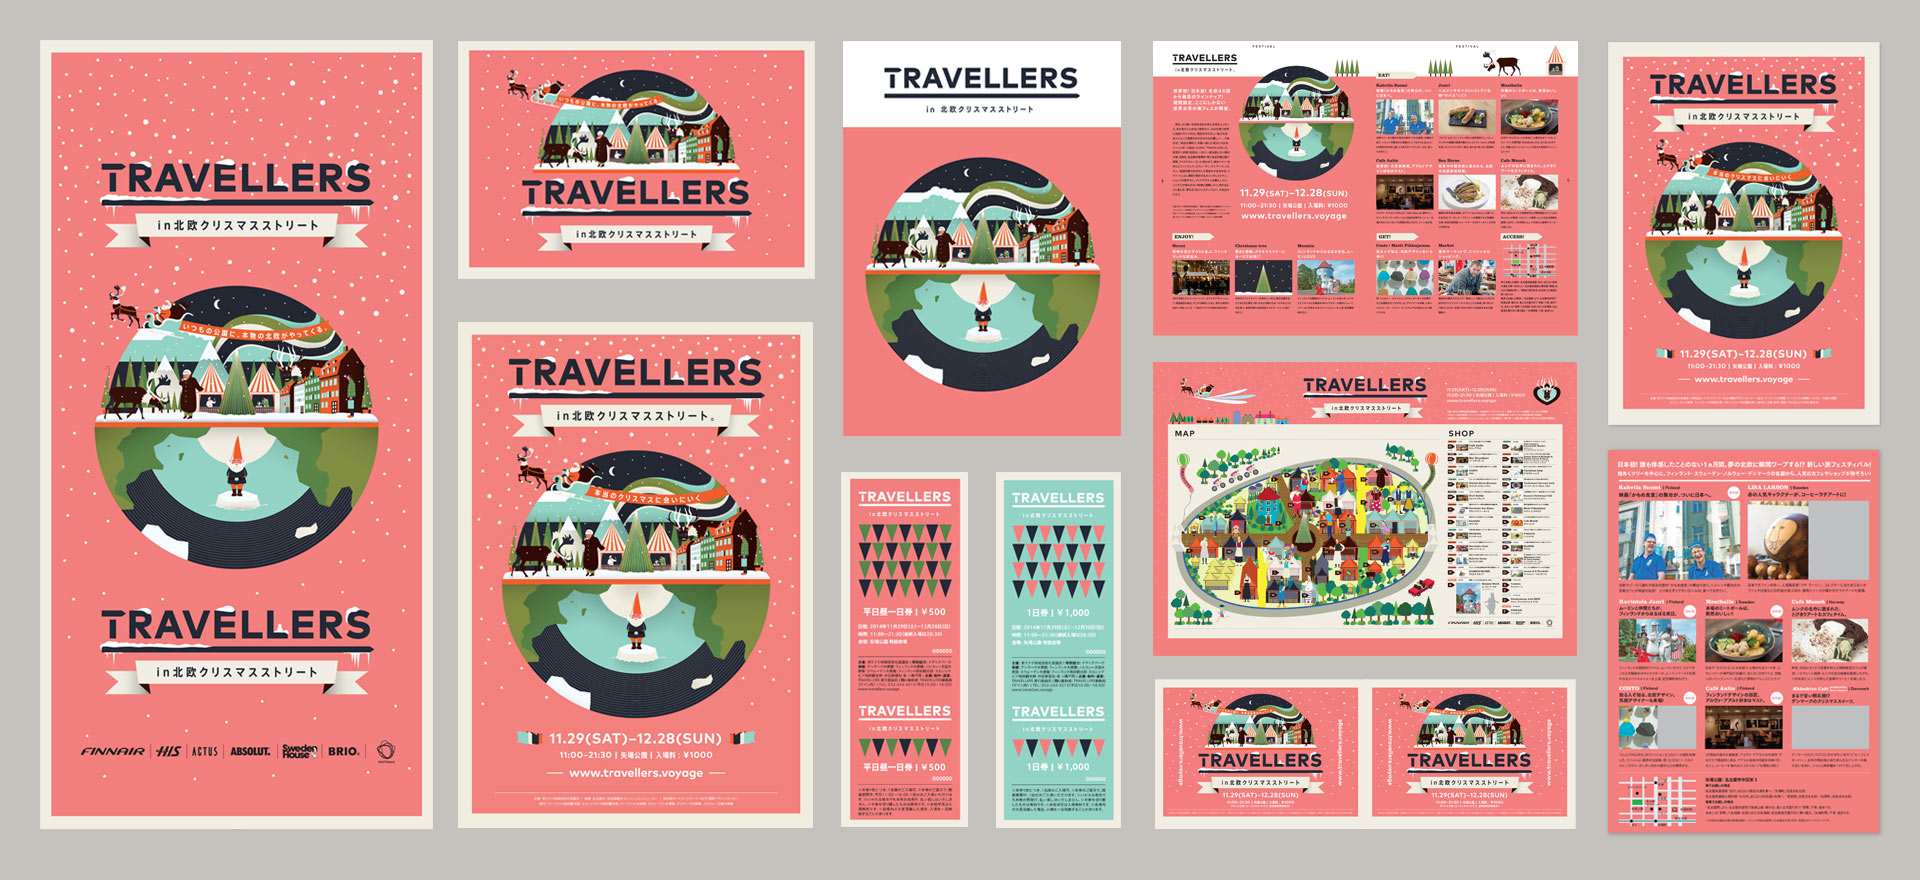 travellers_004